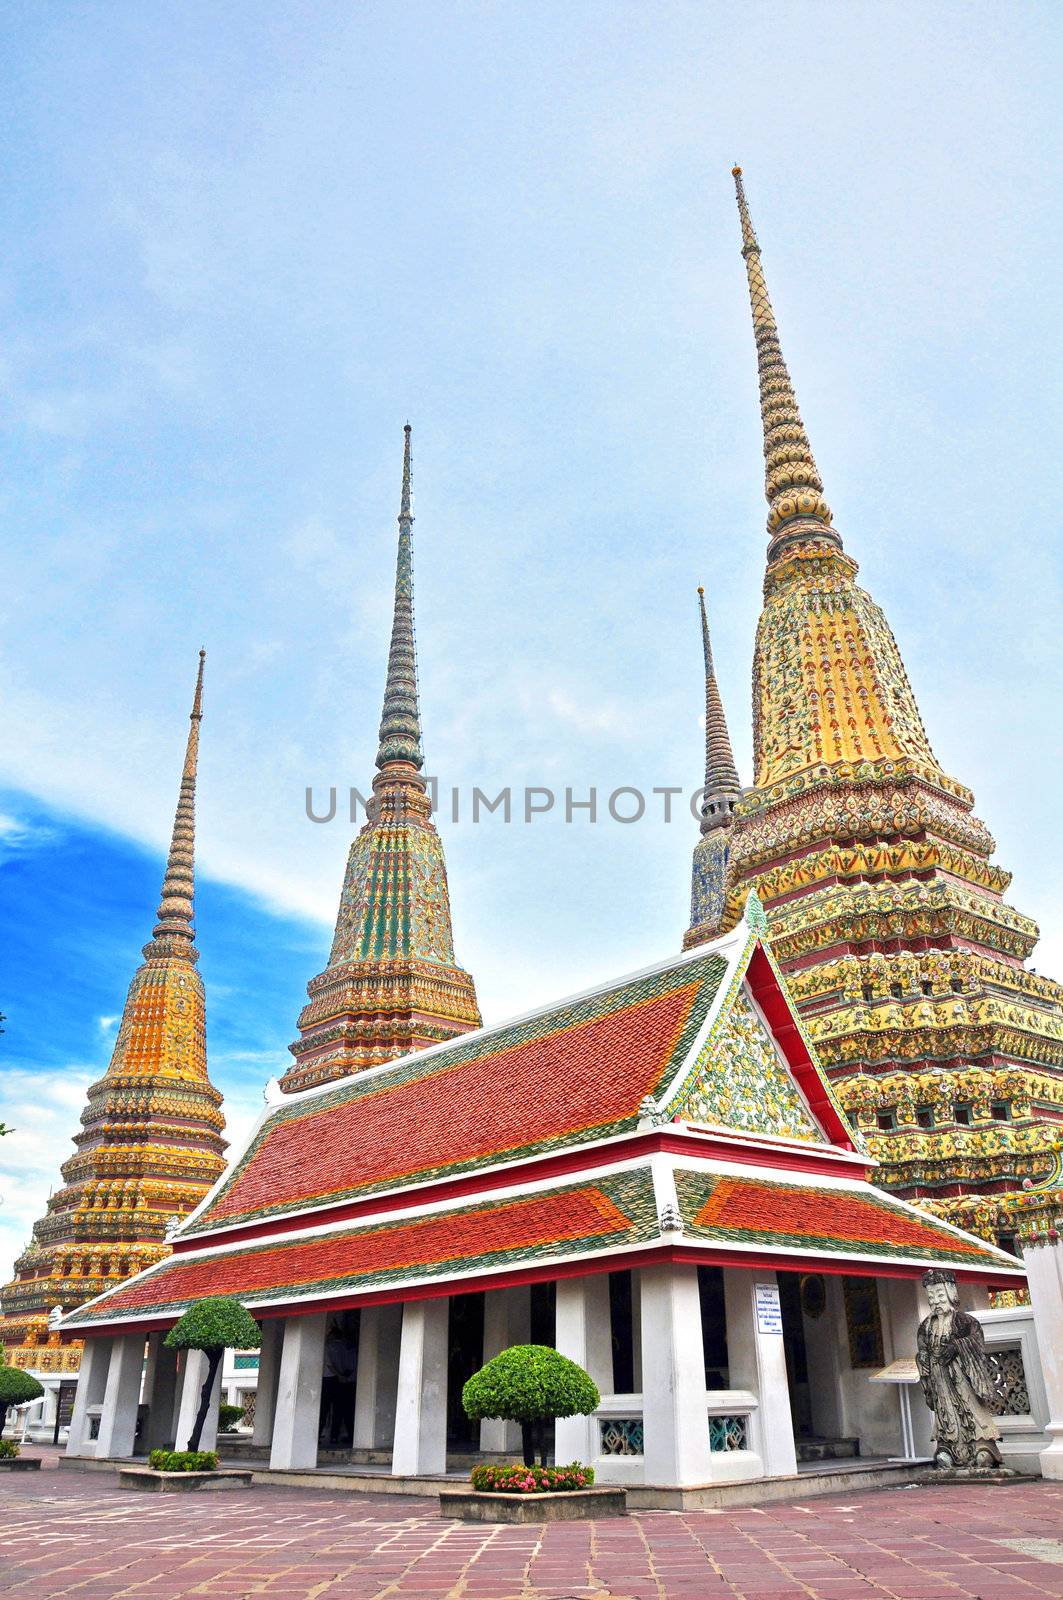 Stupa and pavilion at Poe temple, Thailand